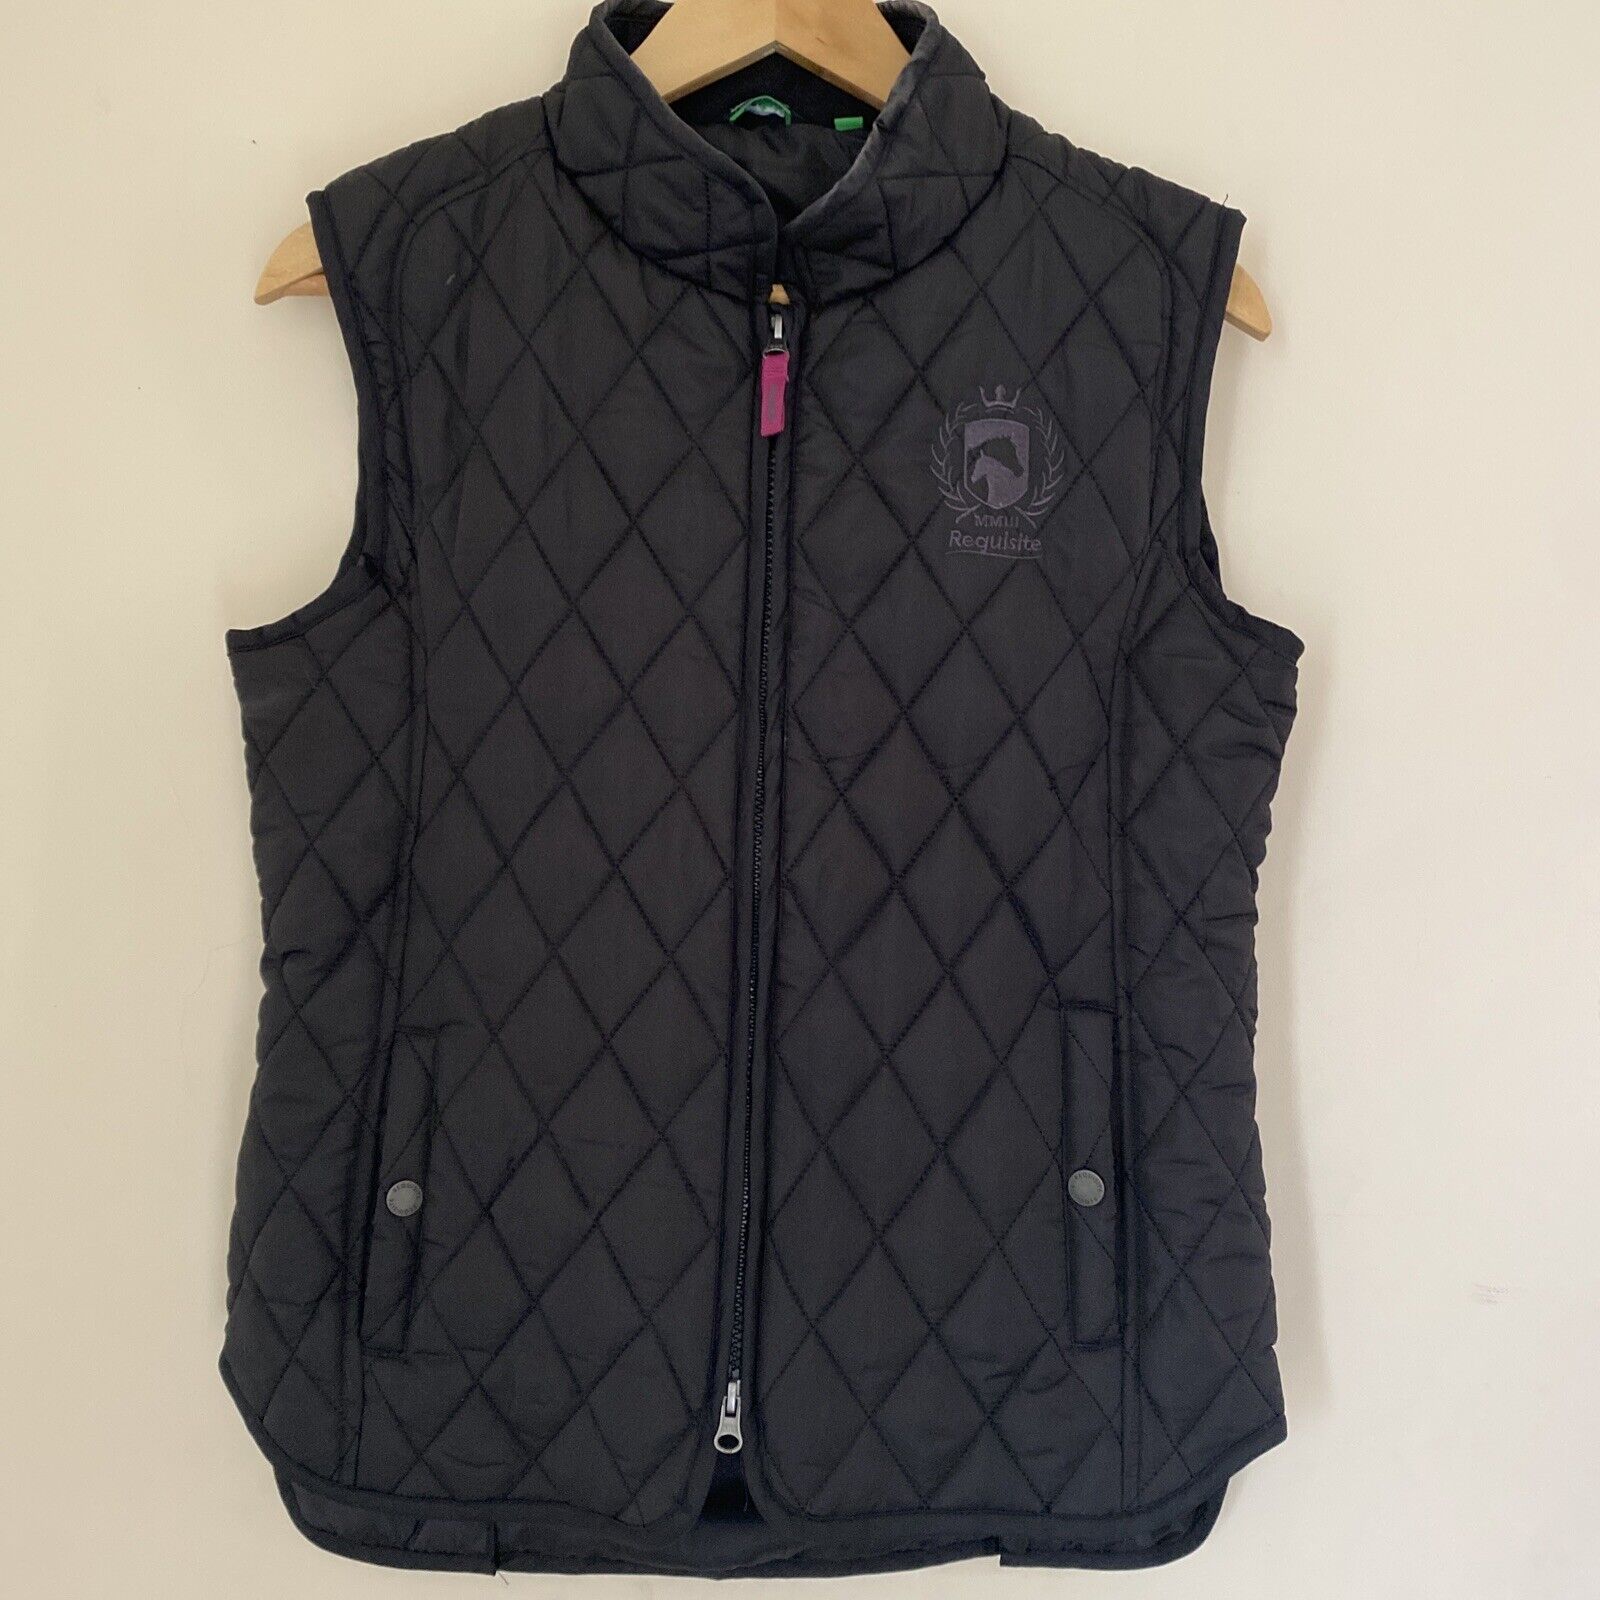 Requisite Body Warmer Gilet Black Quilted Size 10